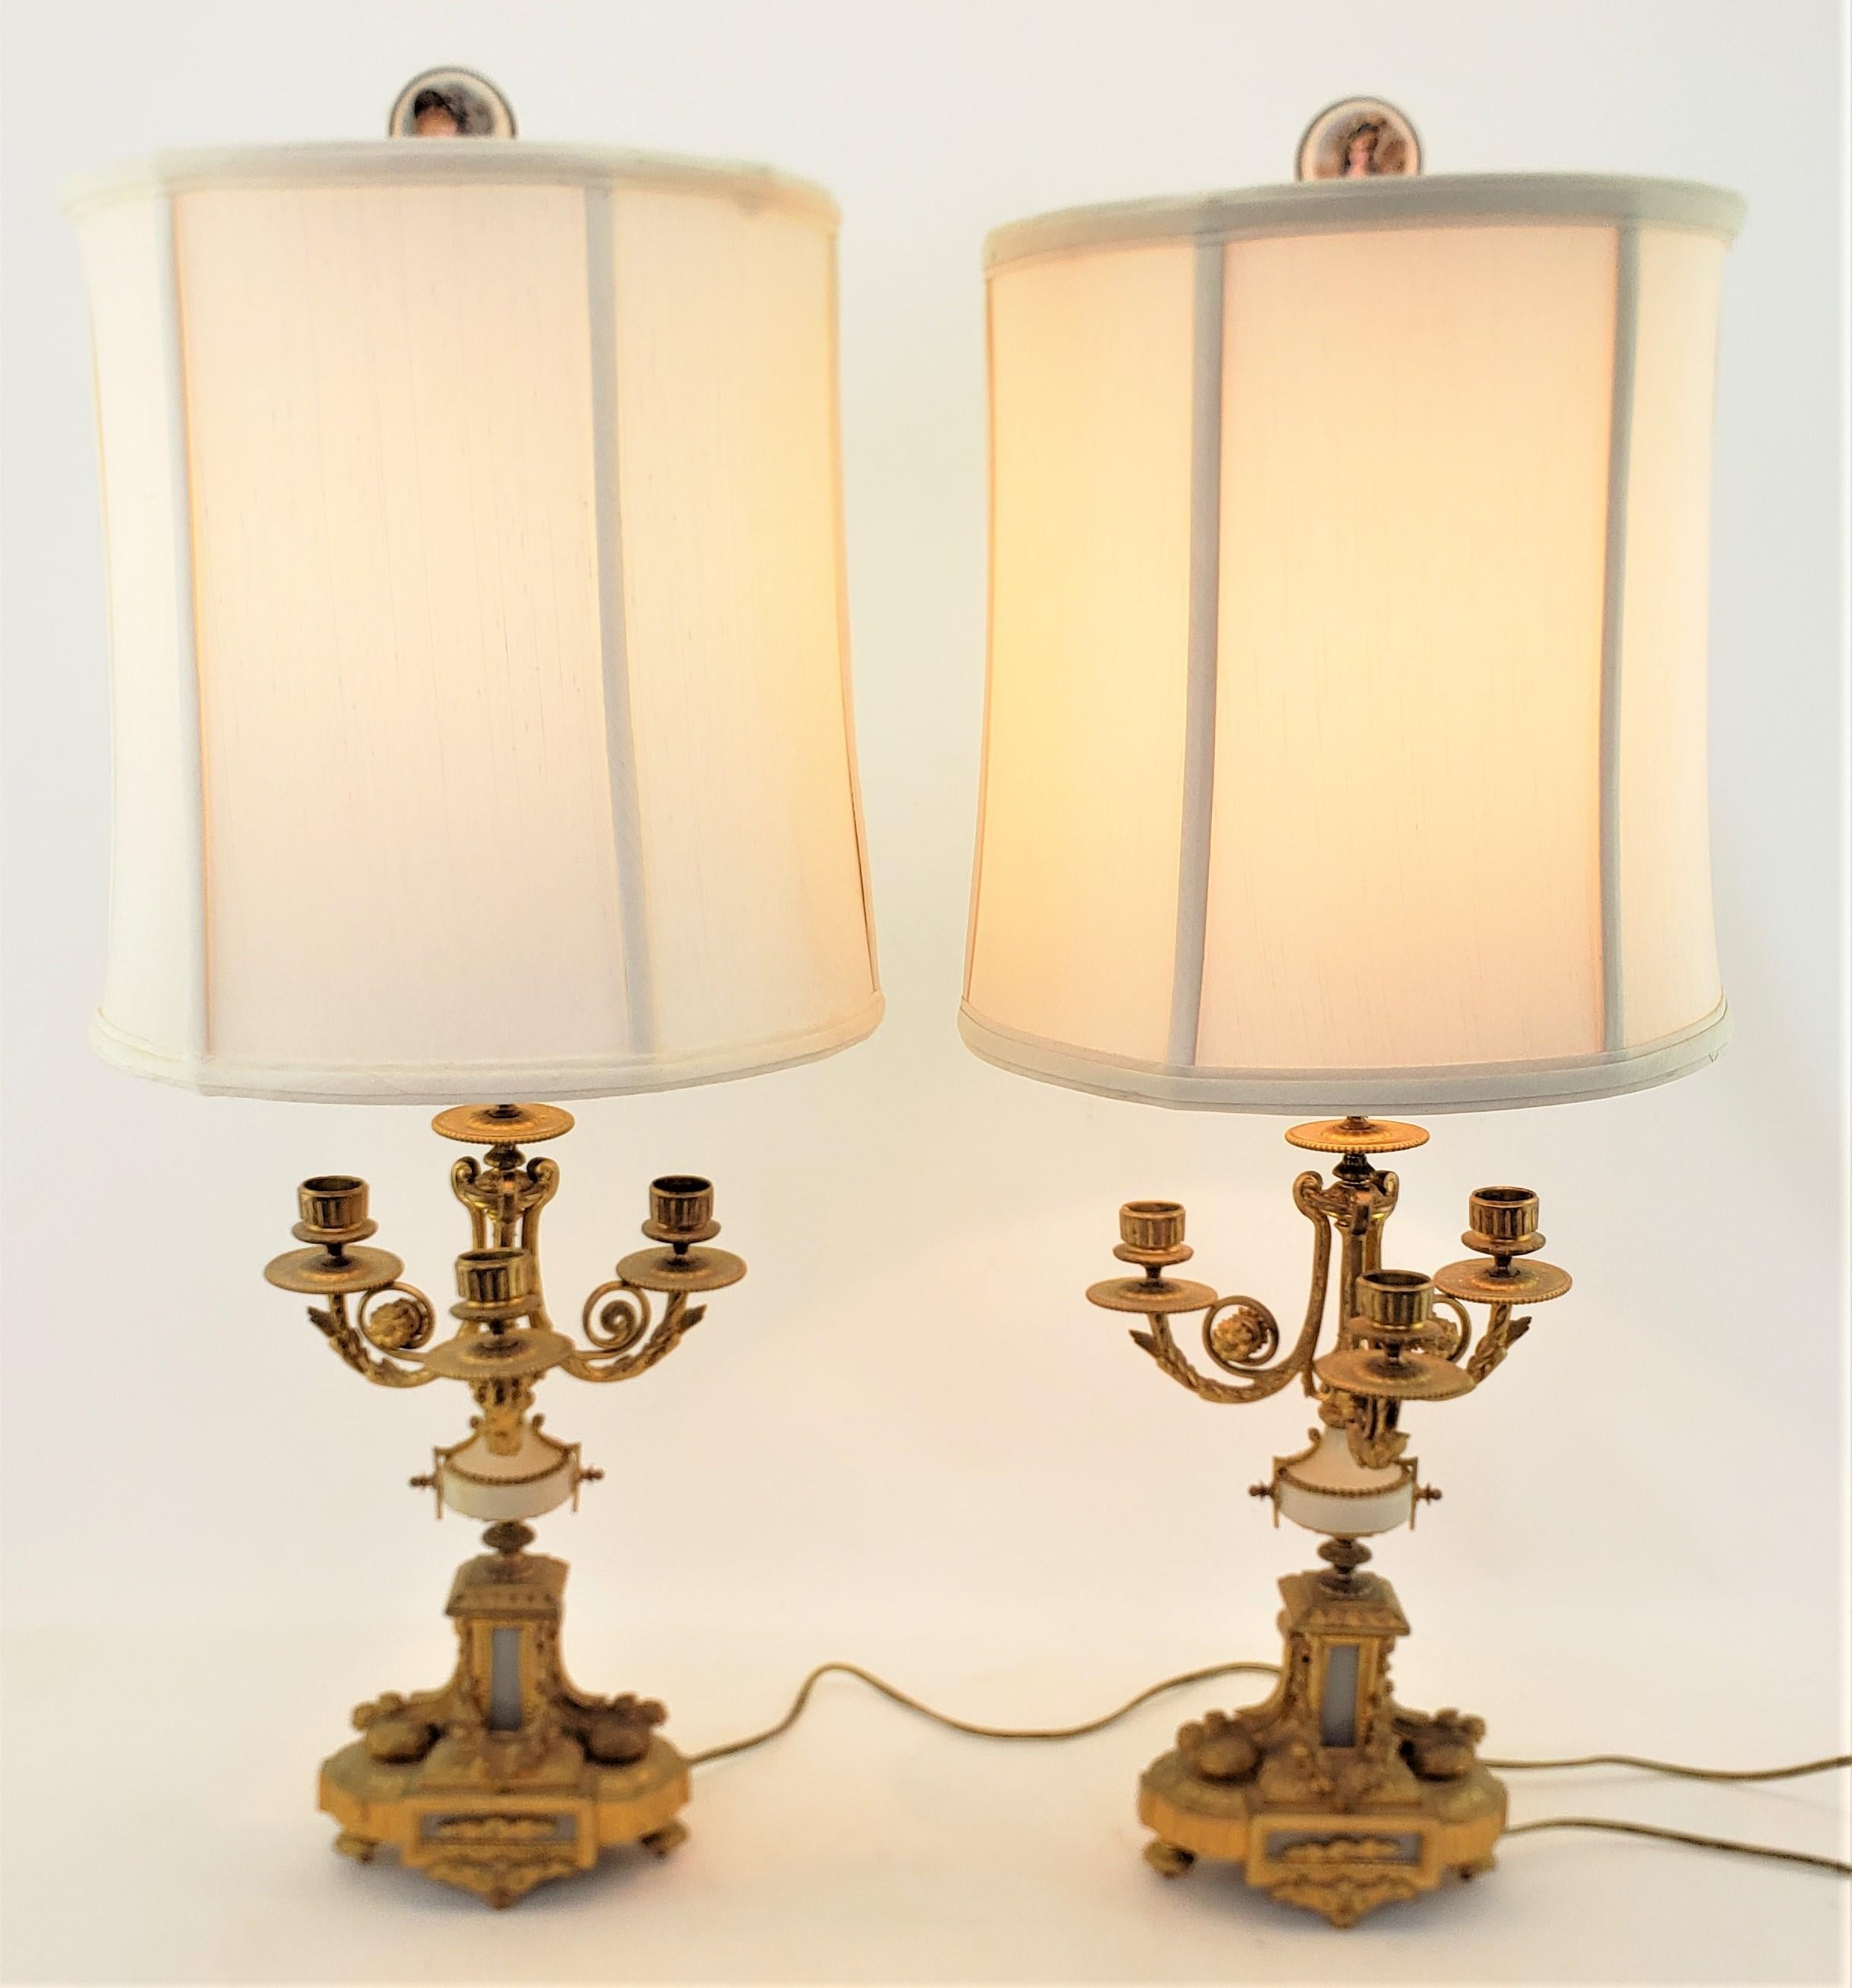 This pair of antique converted candelabra lamps are unsigned, but presumed to have originated from France and date to approximately 1880 and done in a Renaissance Revival style. The candelabras are composed of ornately cast and gilt finished bronze